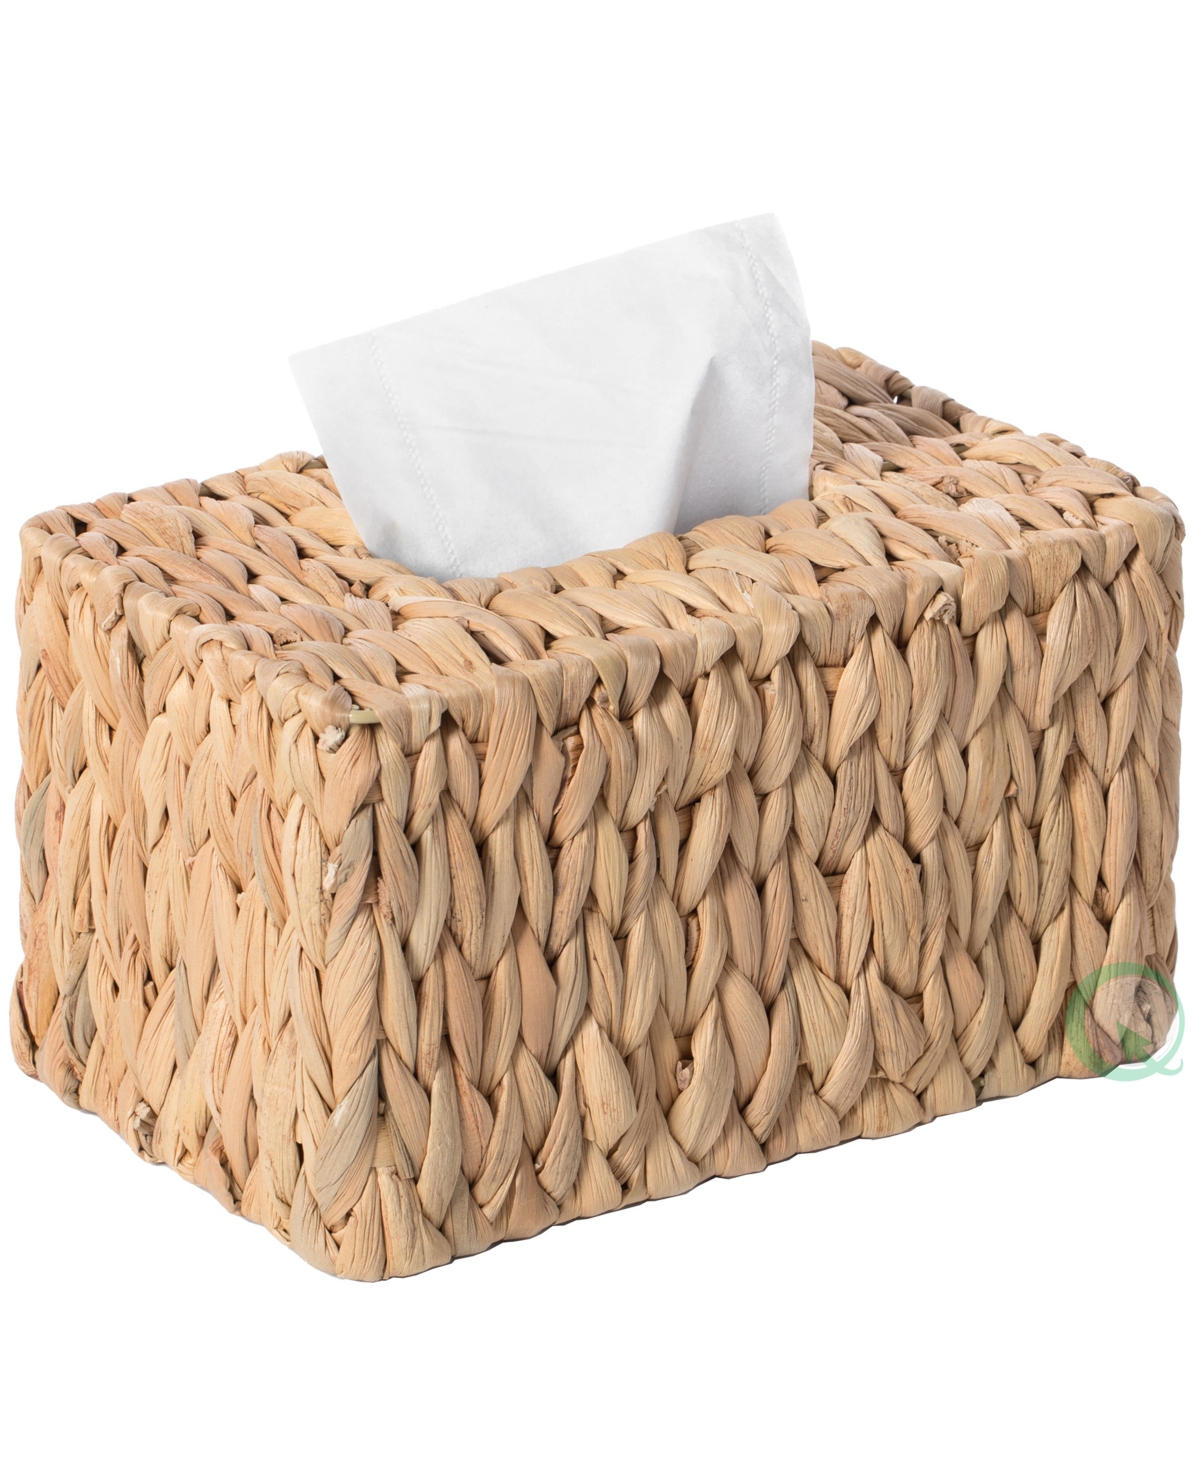 Vintiquewise Water Hyacinth Wicker Rectangular Tissue Box Cover In Brown